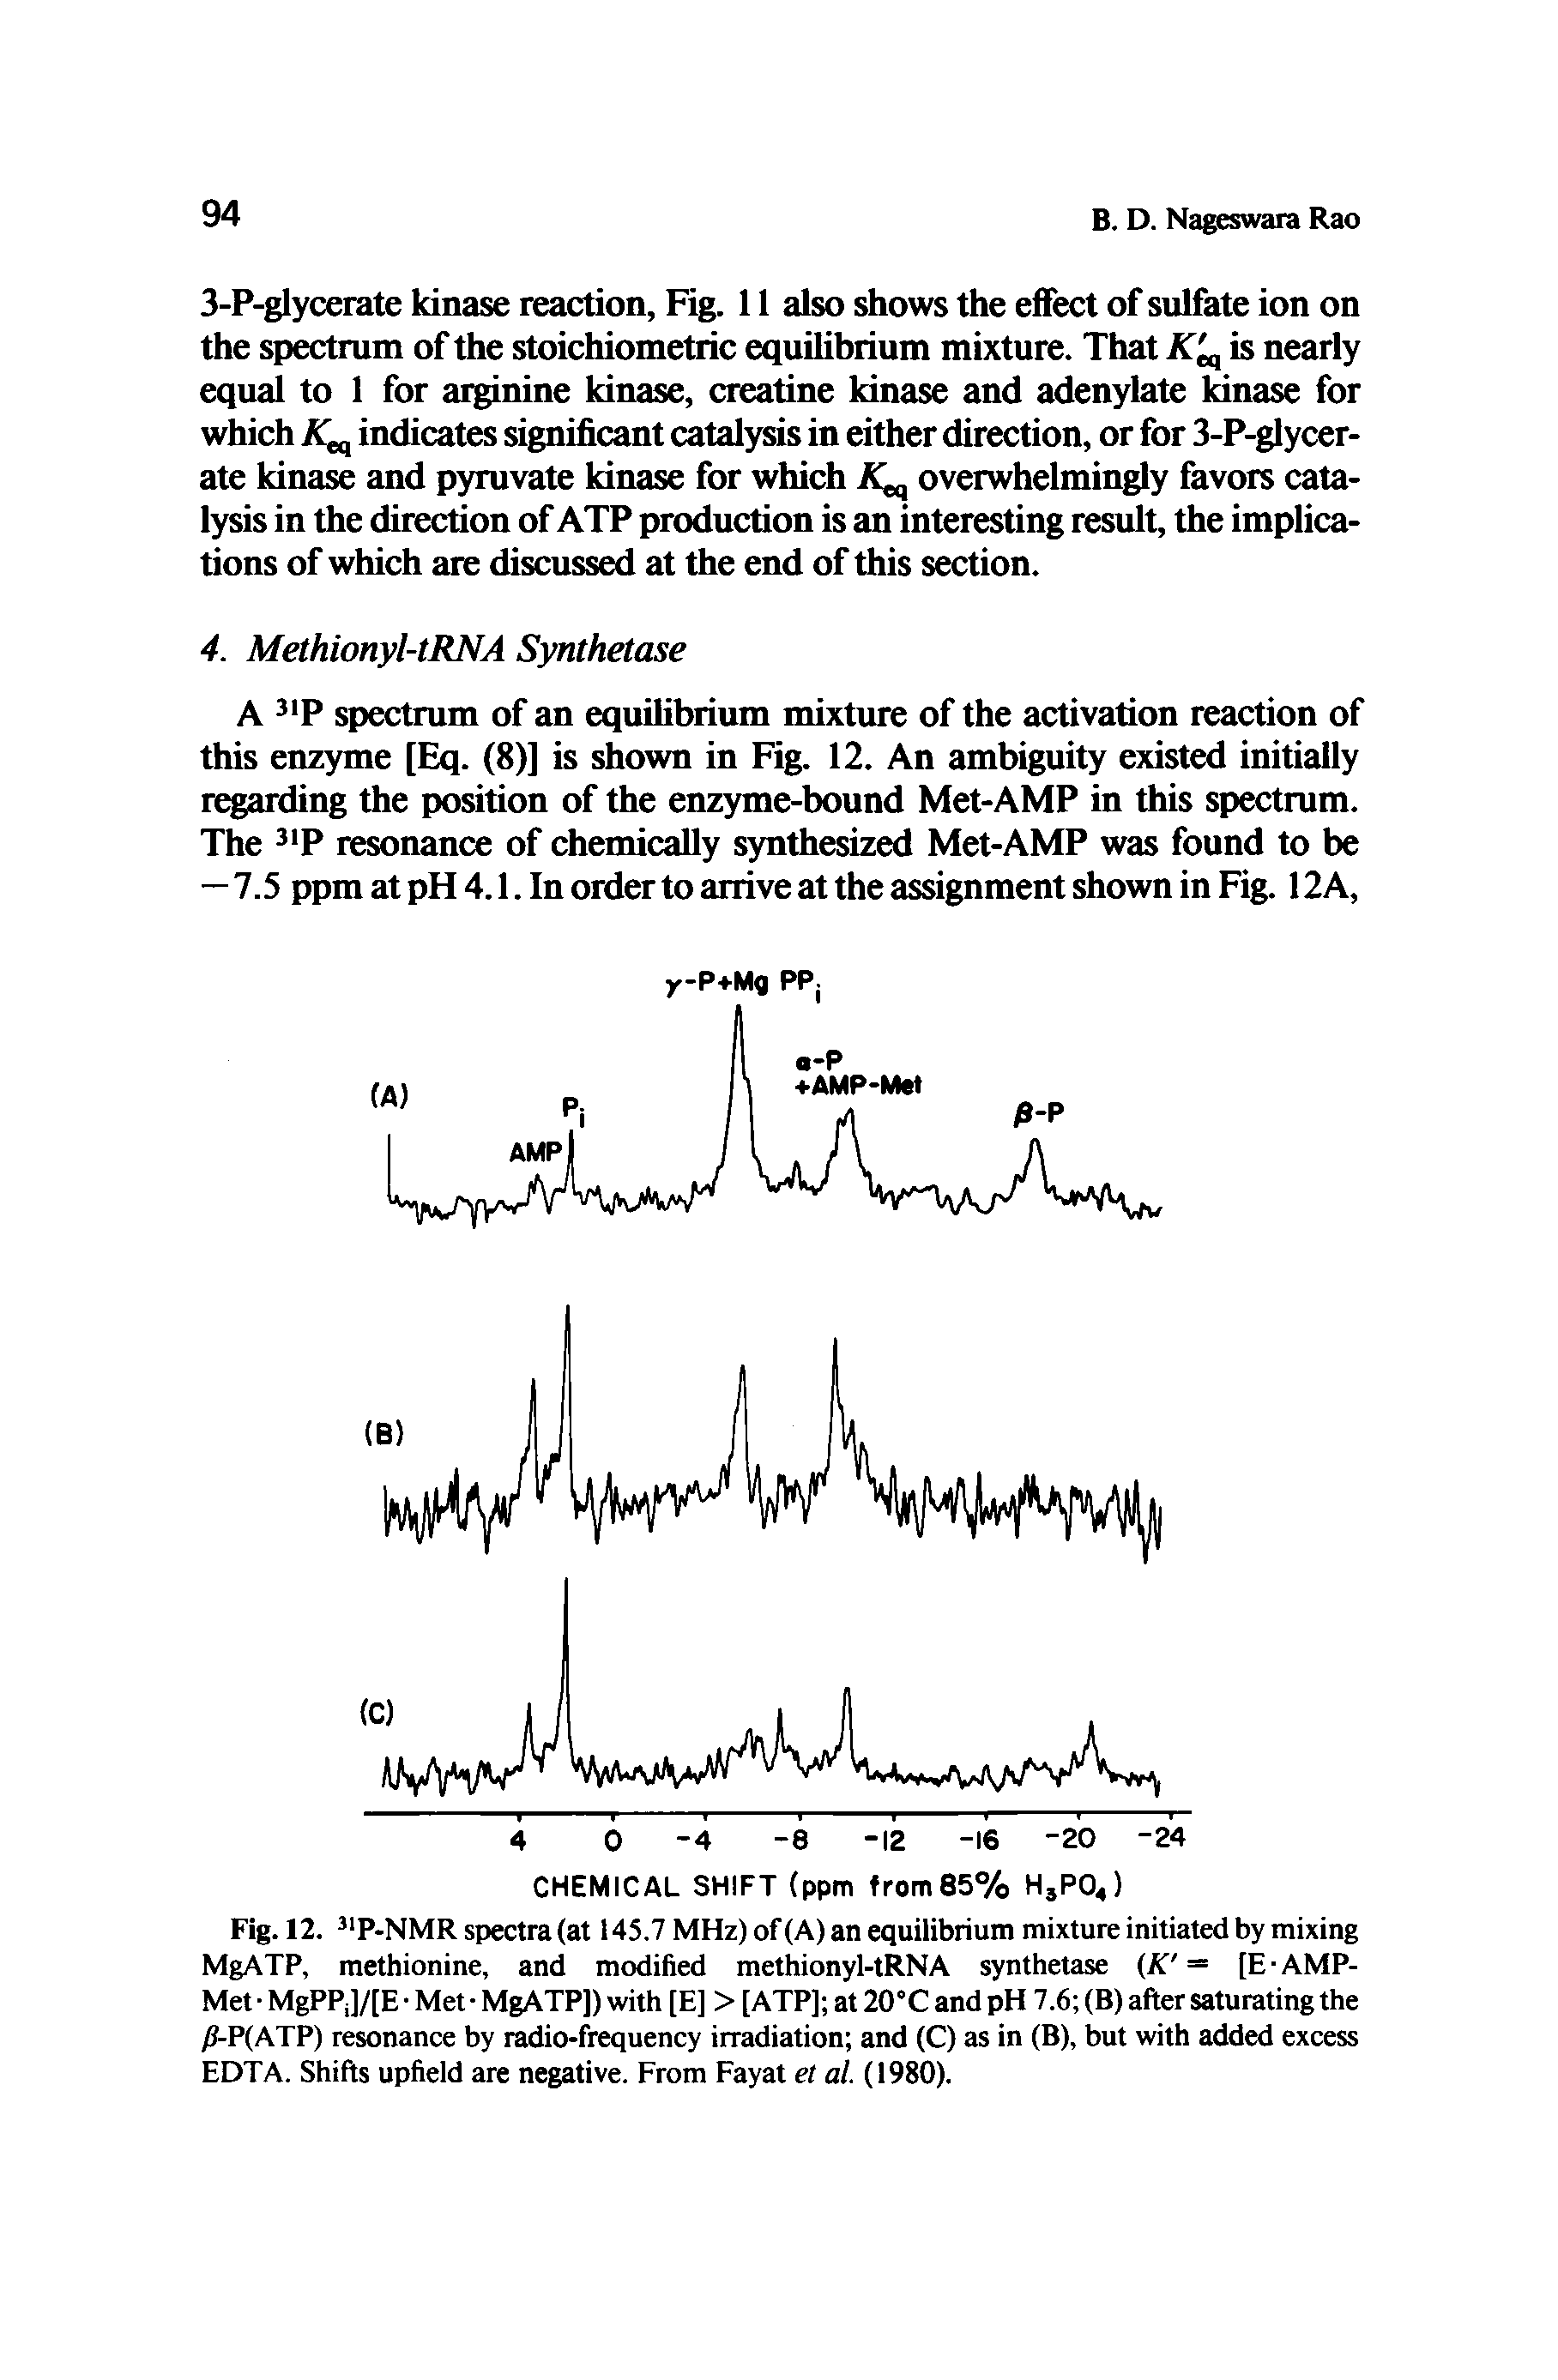 Fig. 12. P-NMR spectra (at 145.7 MHz) of(A) an equilibrium mixture initiated by mixing MgATP, methionine, and modified methionyl-tRNA synthetase (K [E-AMP-Met MgPPJ/[E Met MgATP]) with [E] > [ATP] at 20 C and pH 7.6 (B) after saturating the ) P(ATP) resonance by radio-frequency irradiation and (C) as in (B), but with added excess EDTA. Shifts upheld are negative. From Fayat et at. (1980).